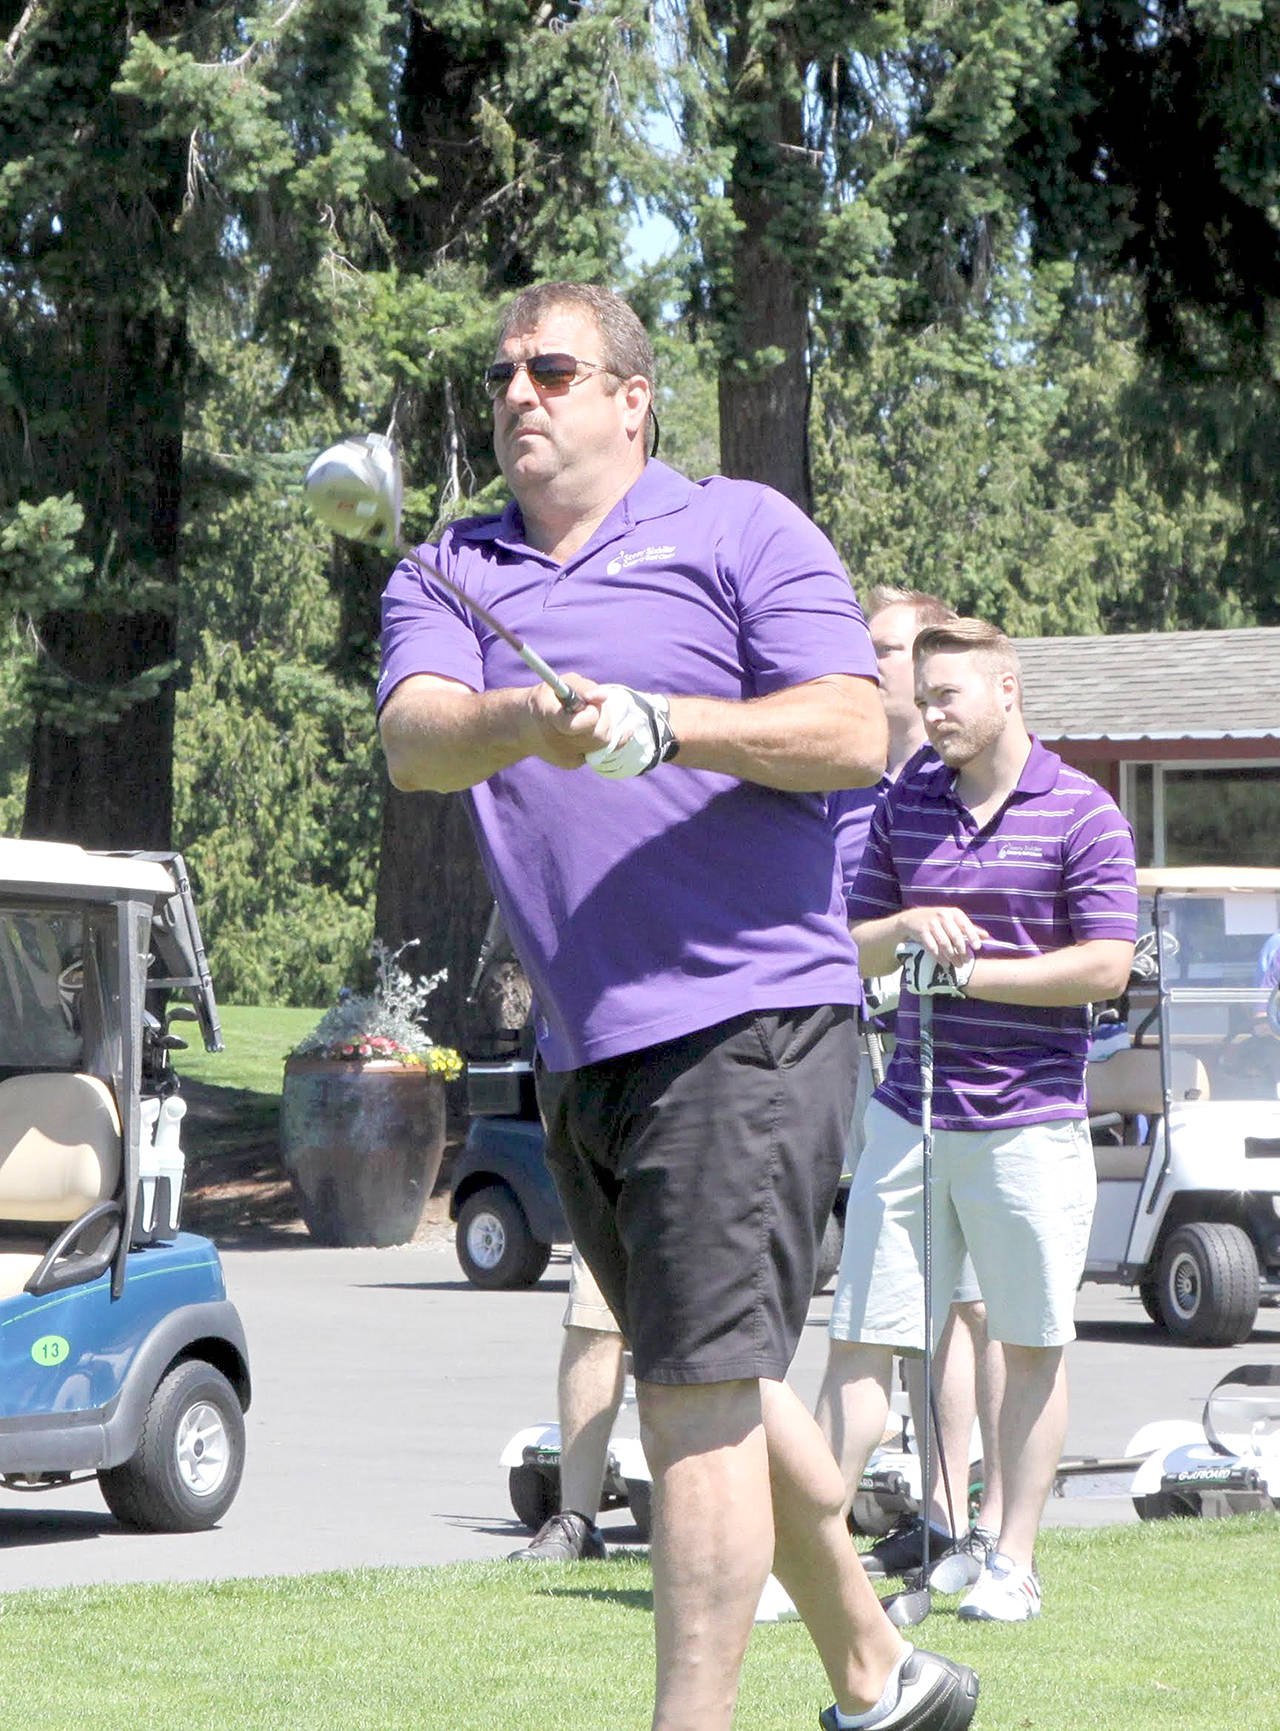 Port Angeles resident Scott Jones tees off on the first hole of the seventh annual Sonny Sixkiller Husky Golf Classic presented by Wilder Auto Center. Jones, a Port Angeles and University of Washington graduate, is the only Roughrider to have played in the NFL. A total of 39 teams and 195 golfers played in the event. The winning team of Todd Negus, Paul Reed, Jordan Negus and Chad Wagner shot a 17-under-par 55 in the scramble event. The team also had former Husky men’s basketball player John Buller. (Dave Logan/for Peninsula Daily News)